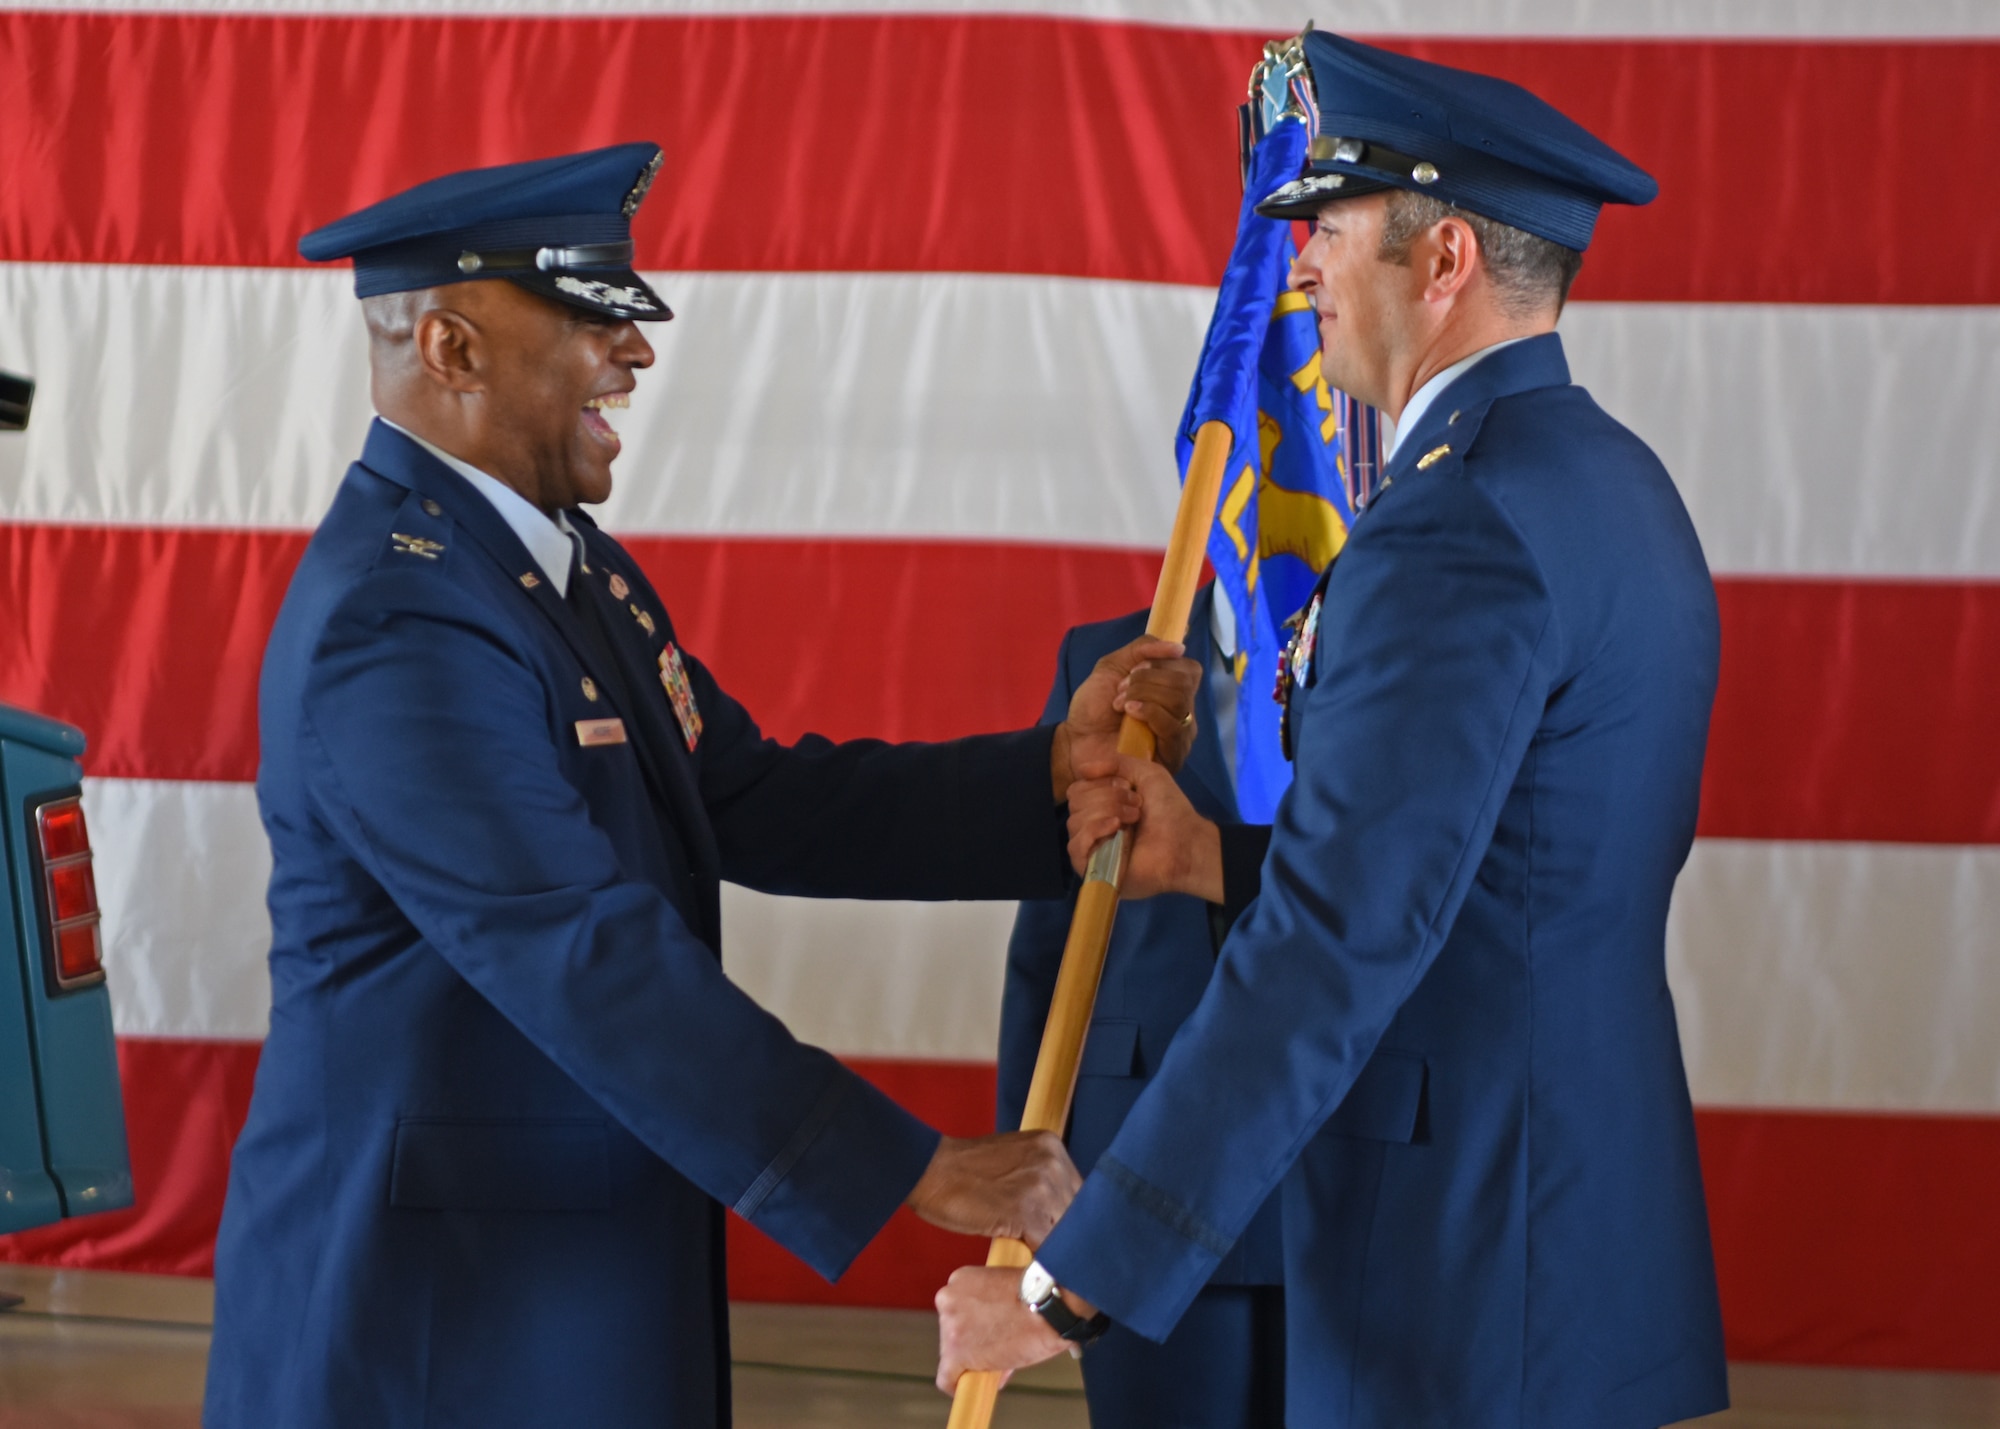 U.S. Air Force Maj. Joseph Freeman, 17th Logistics Readiness Squadron outgoing commander, (right) relinquishes command to Col. Eugene Moore III, 17th Mission Support Group commander, during the 17th LRS change of command ceremony at Goodfellow Air Force Base, Texas, May 20, 2022. Passing the guidon physically represents the symbolism of passing the squadron responsibilities to the next commander. (U.S. Air Force photo by Senior Airman Ethan Sherwood)